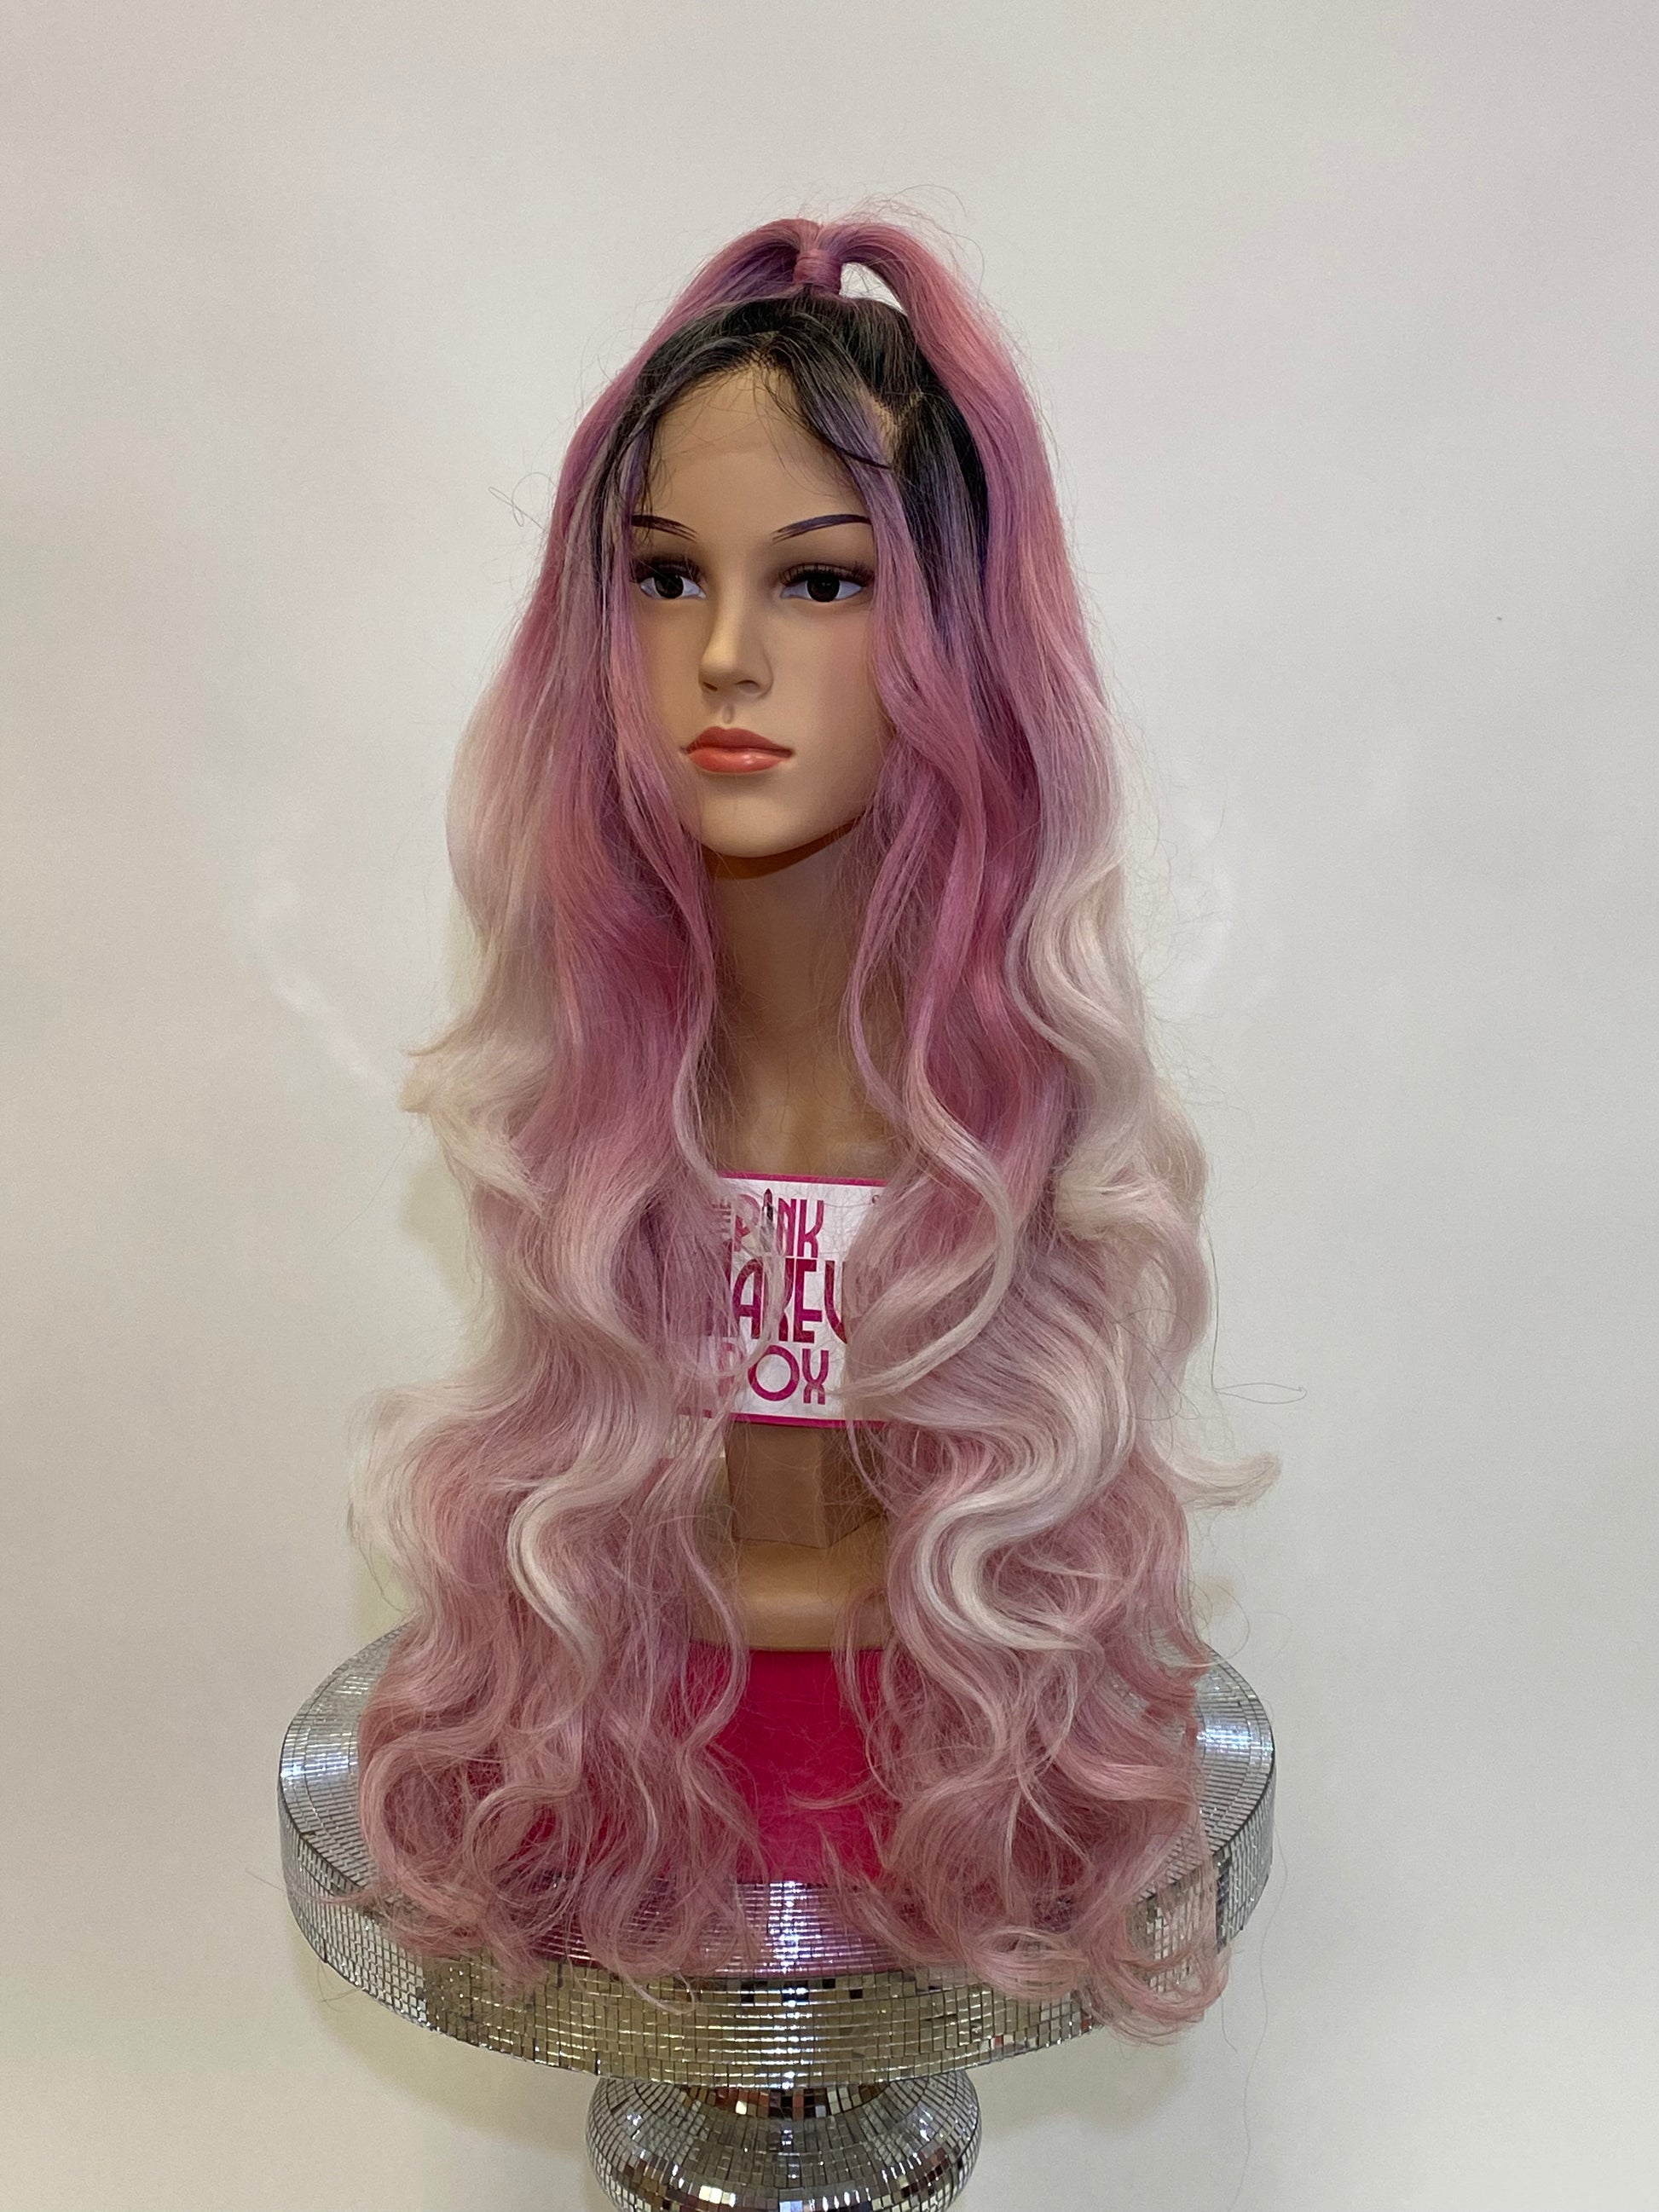 356 Ariana - 13x2 & 360 Top Pony Lace Front Wig - 1B/PINK - DaizyKat Cosmetics 356 Ariana - 13x2 & 360 Top Pony Lace Front Wig - 1B/PINK DaizyKat Cosmetics WIGS